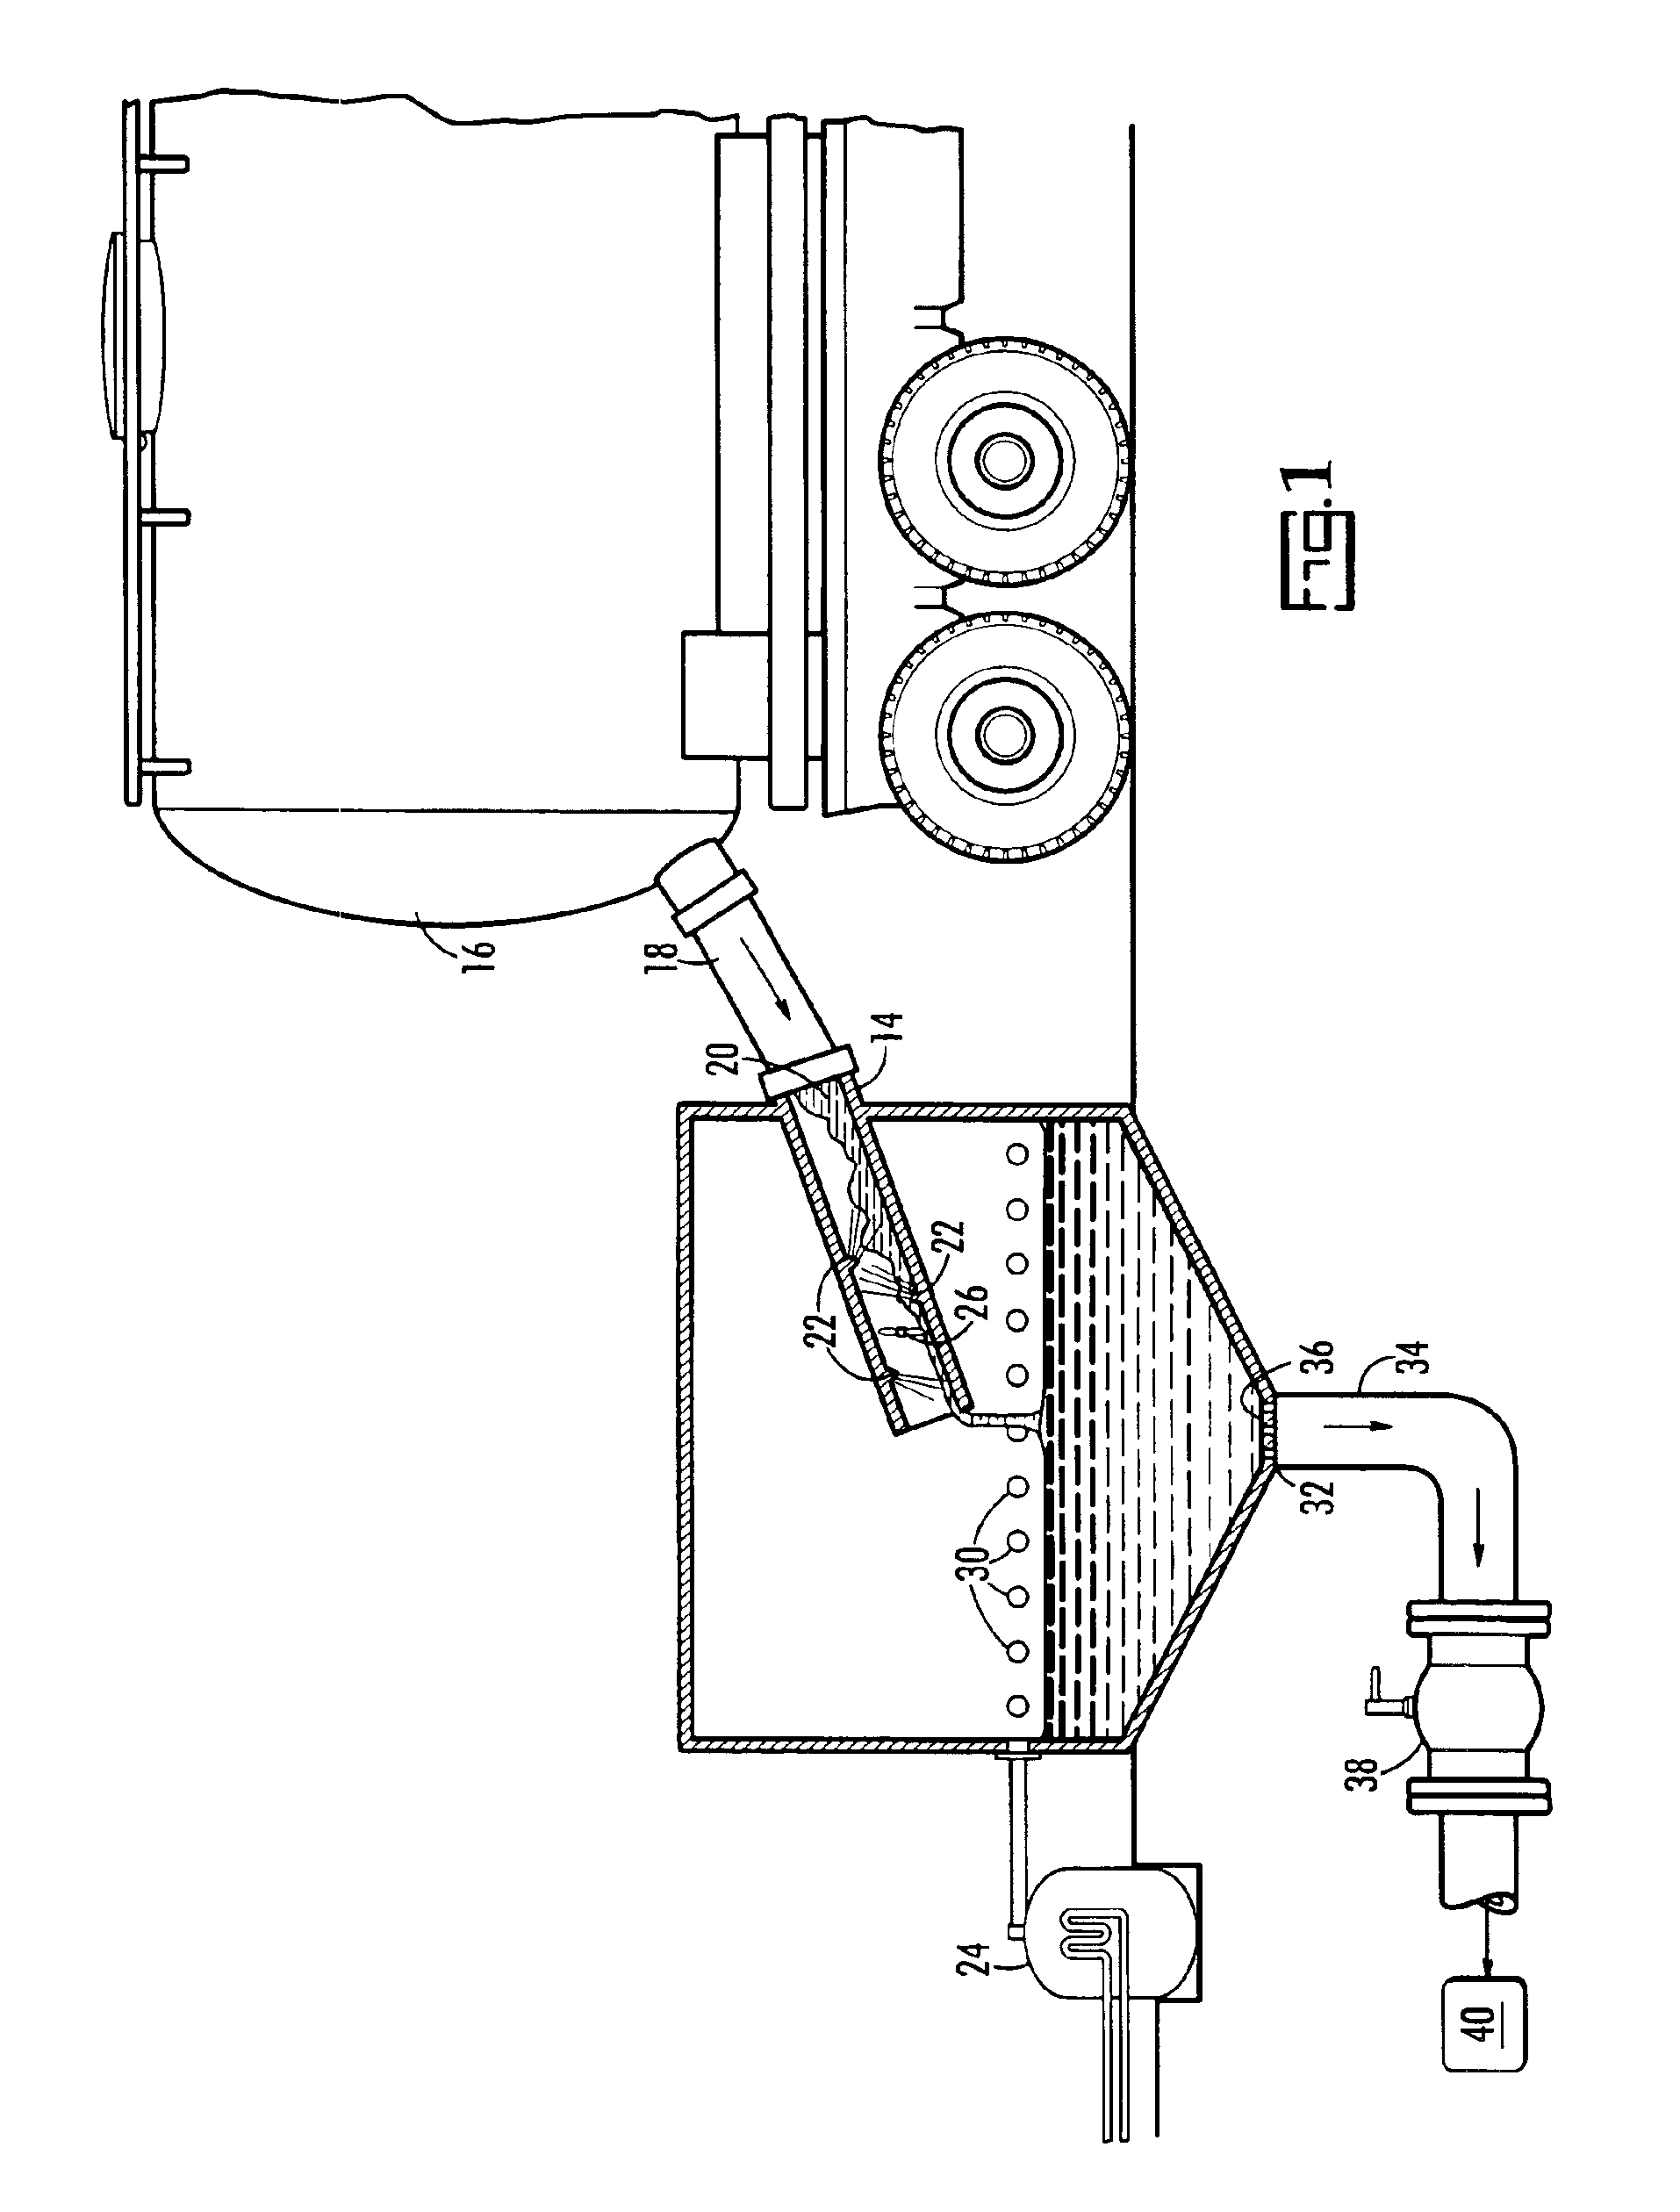 Waste processing system